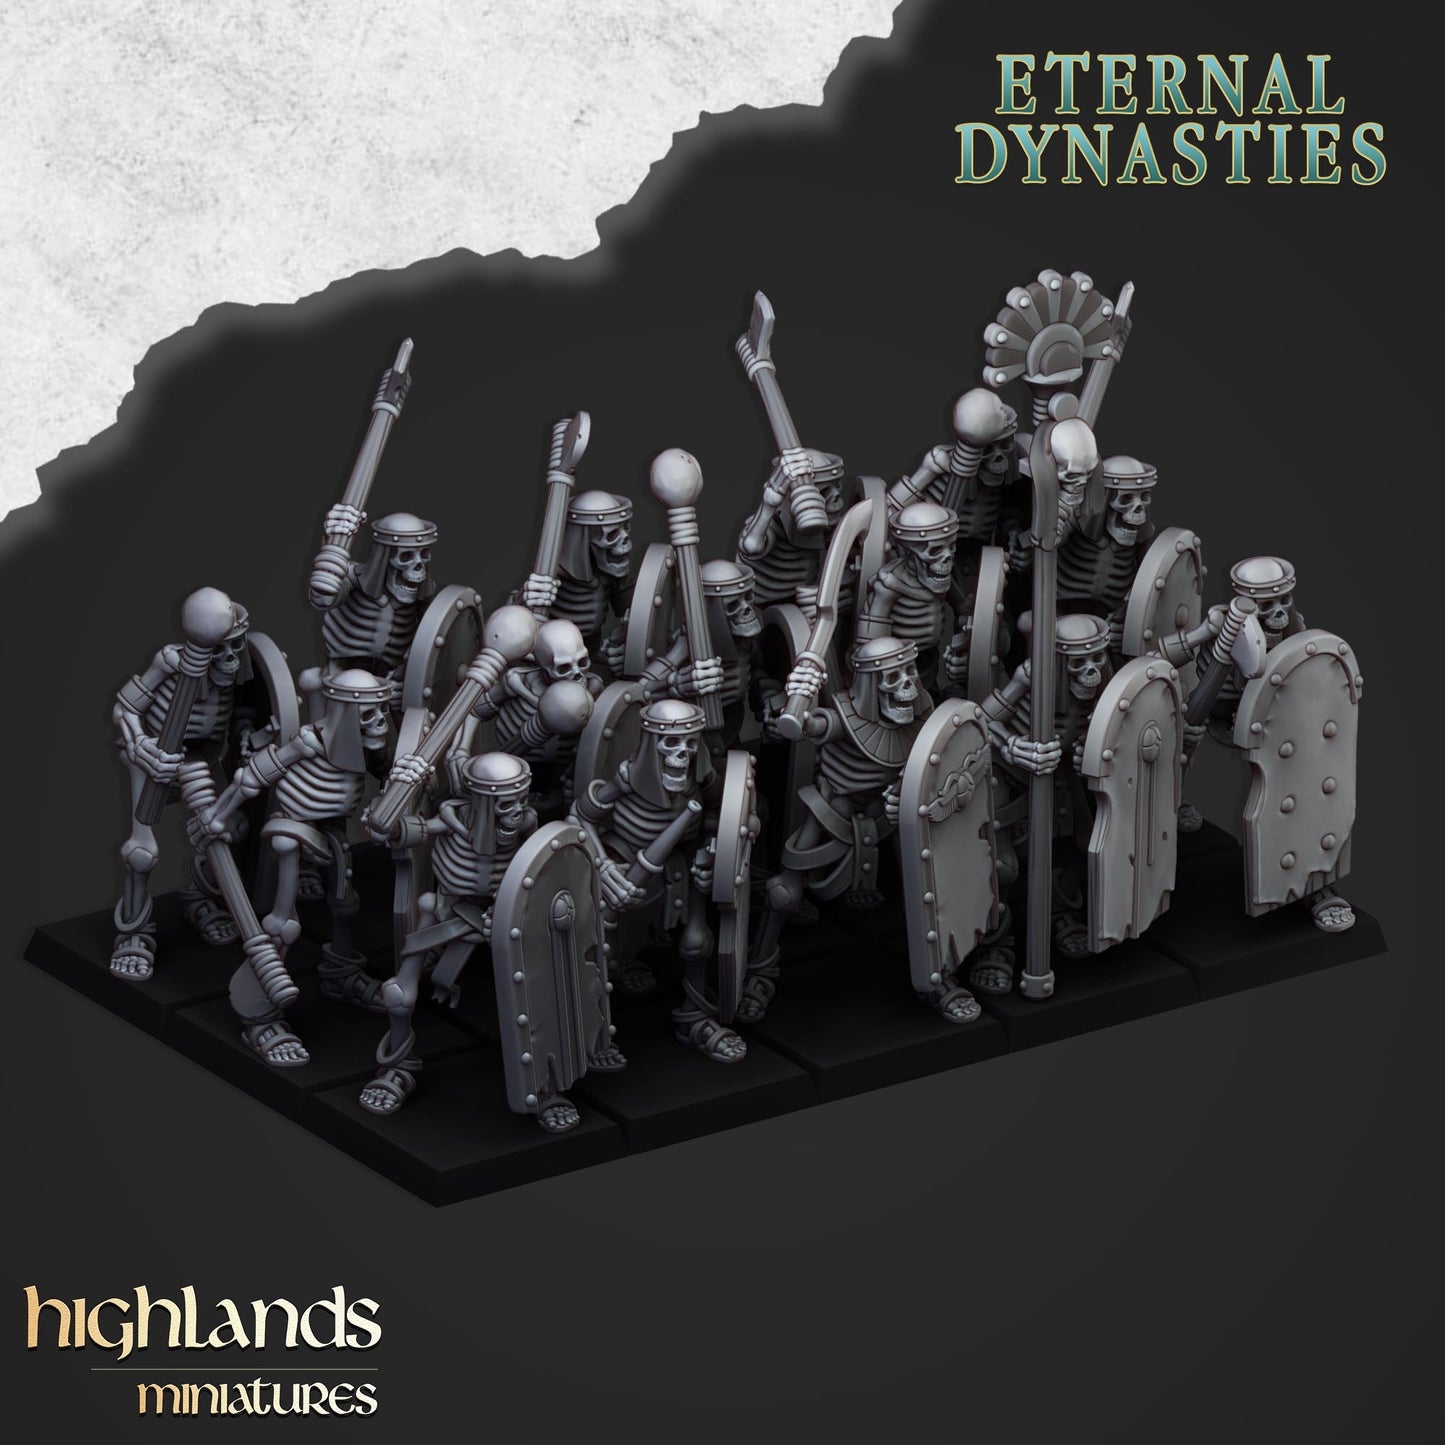 Ancient Skeletons with Hand Weapons by Highlands Miniatures